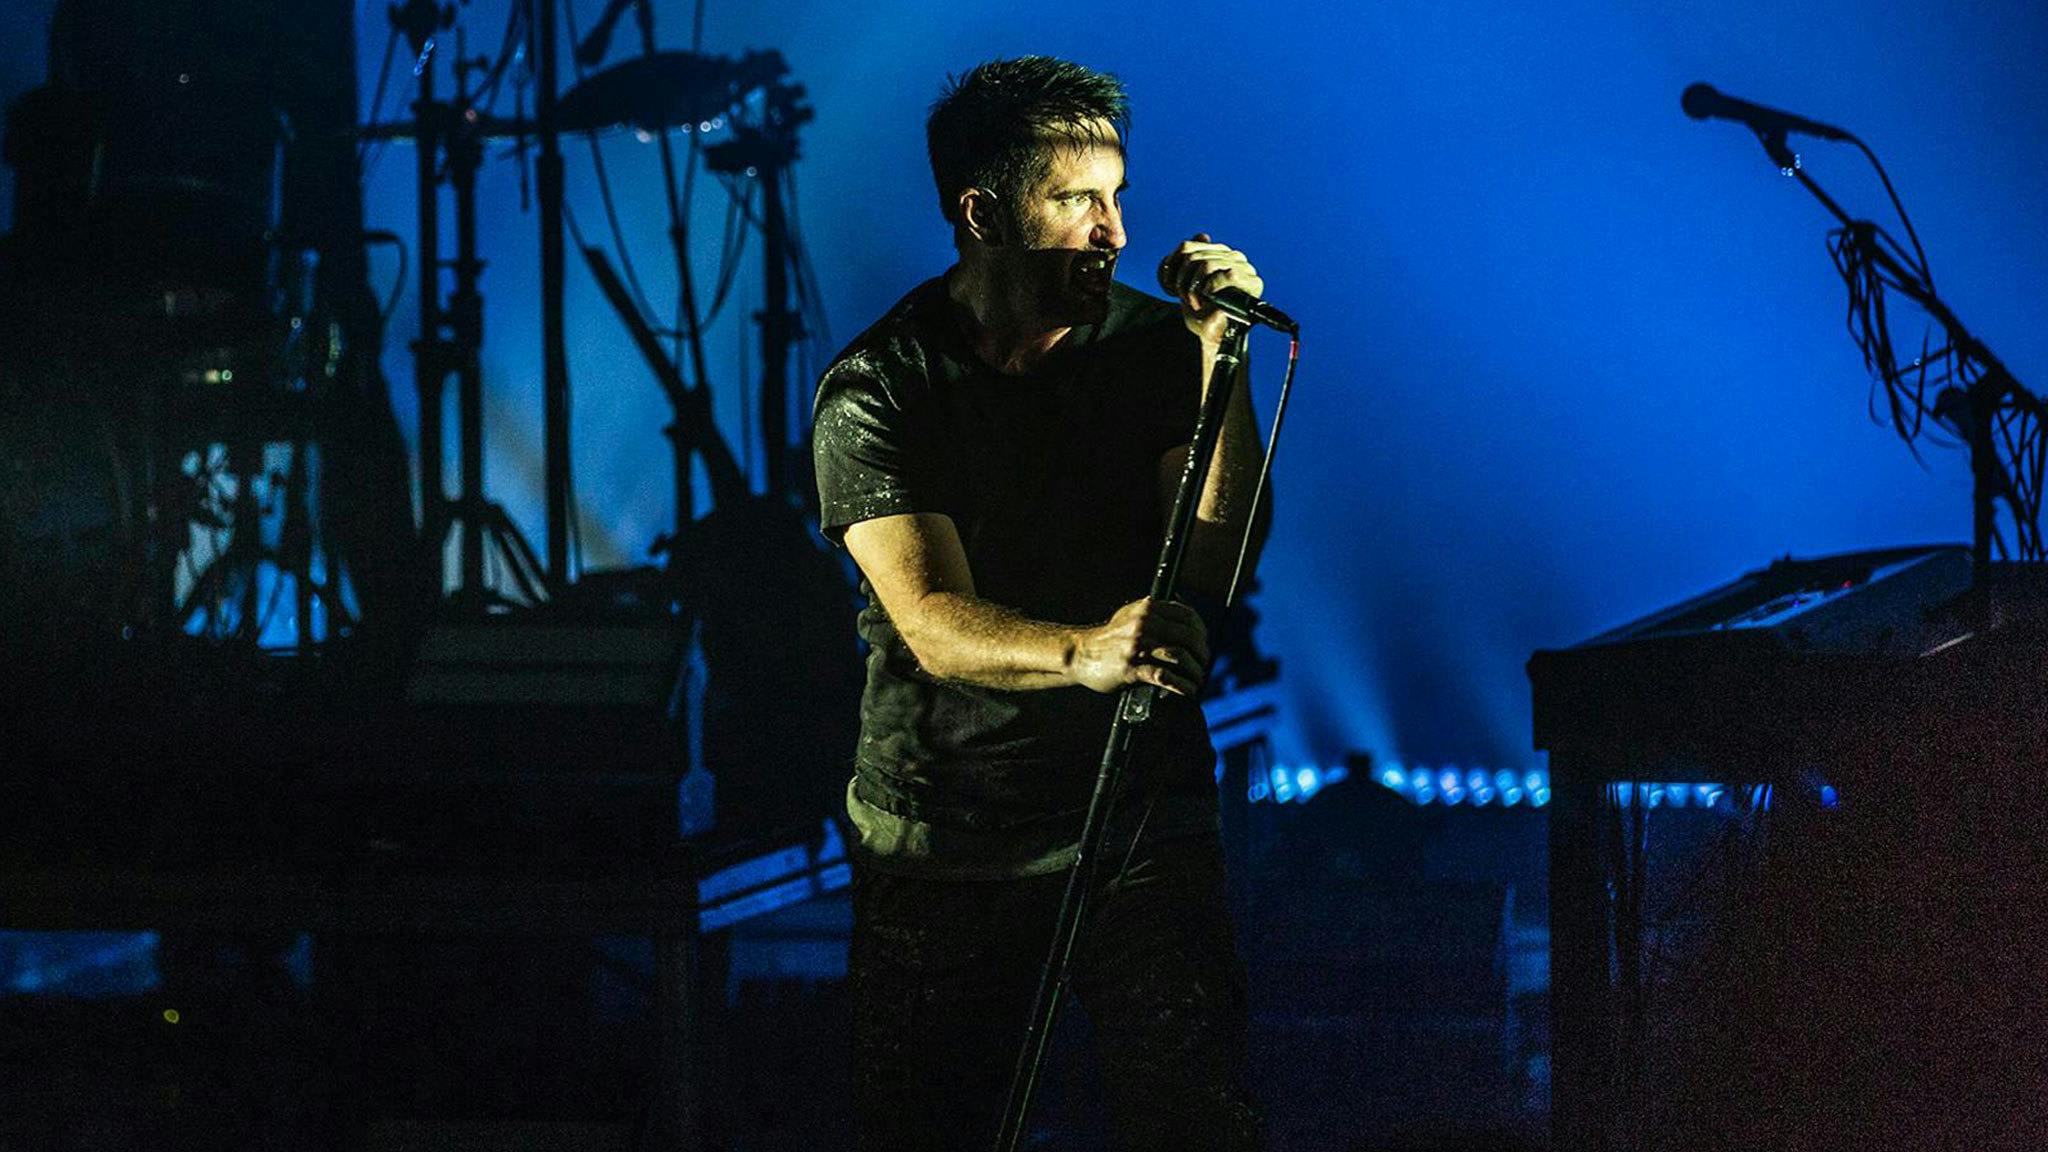 Trent Reznor reflects on 30 years of The Downward Spiral: “It still excites me and breaks my heart”